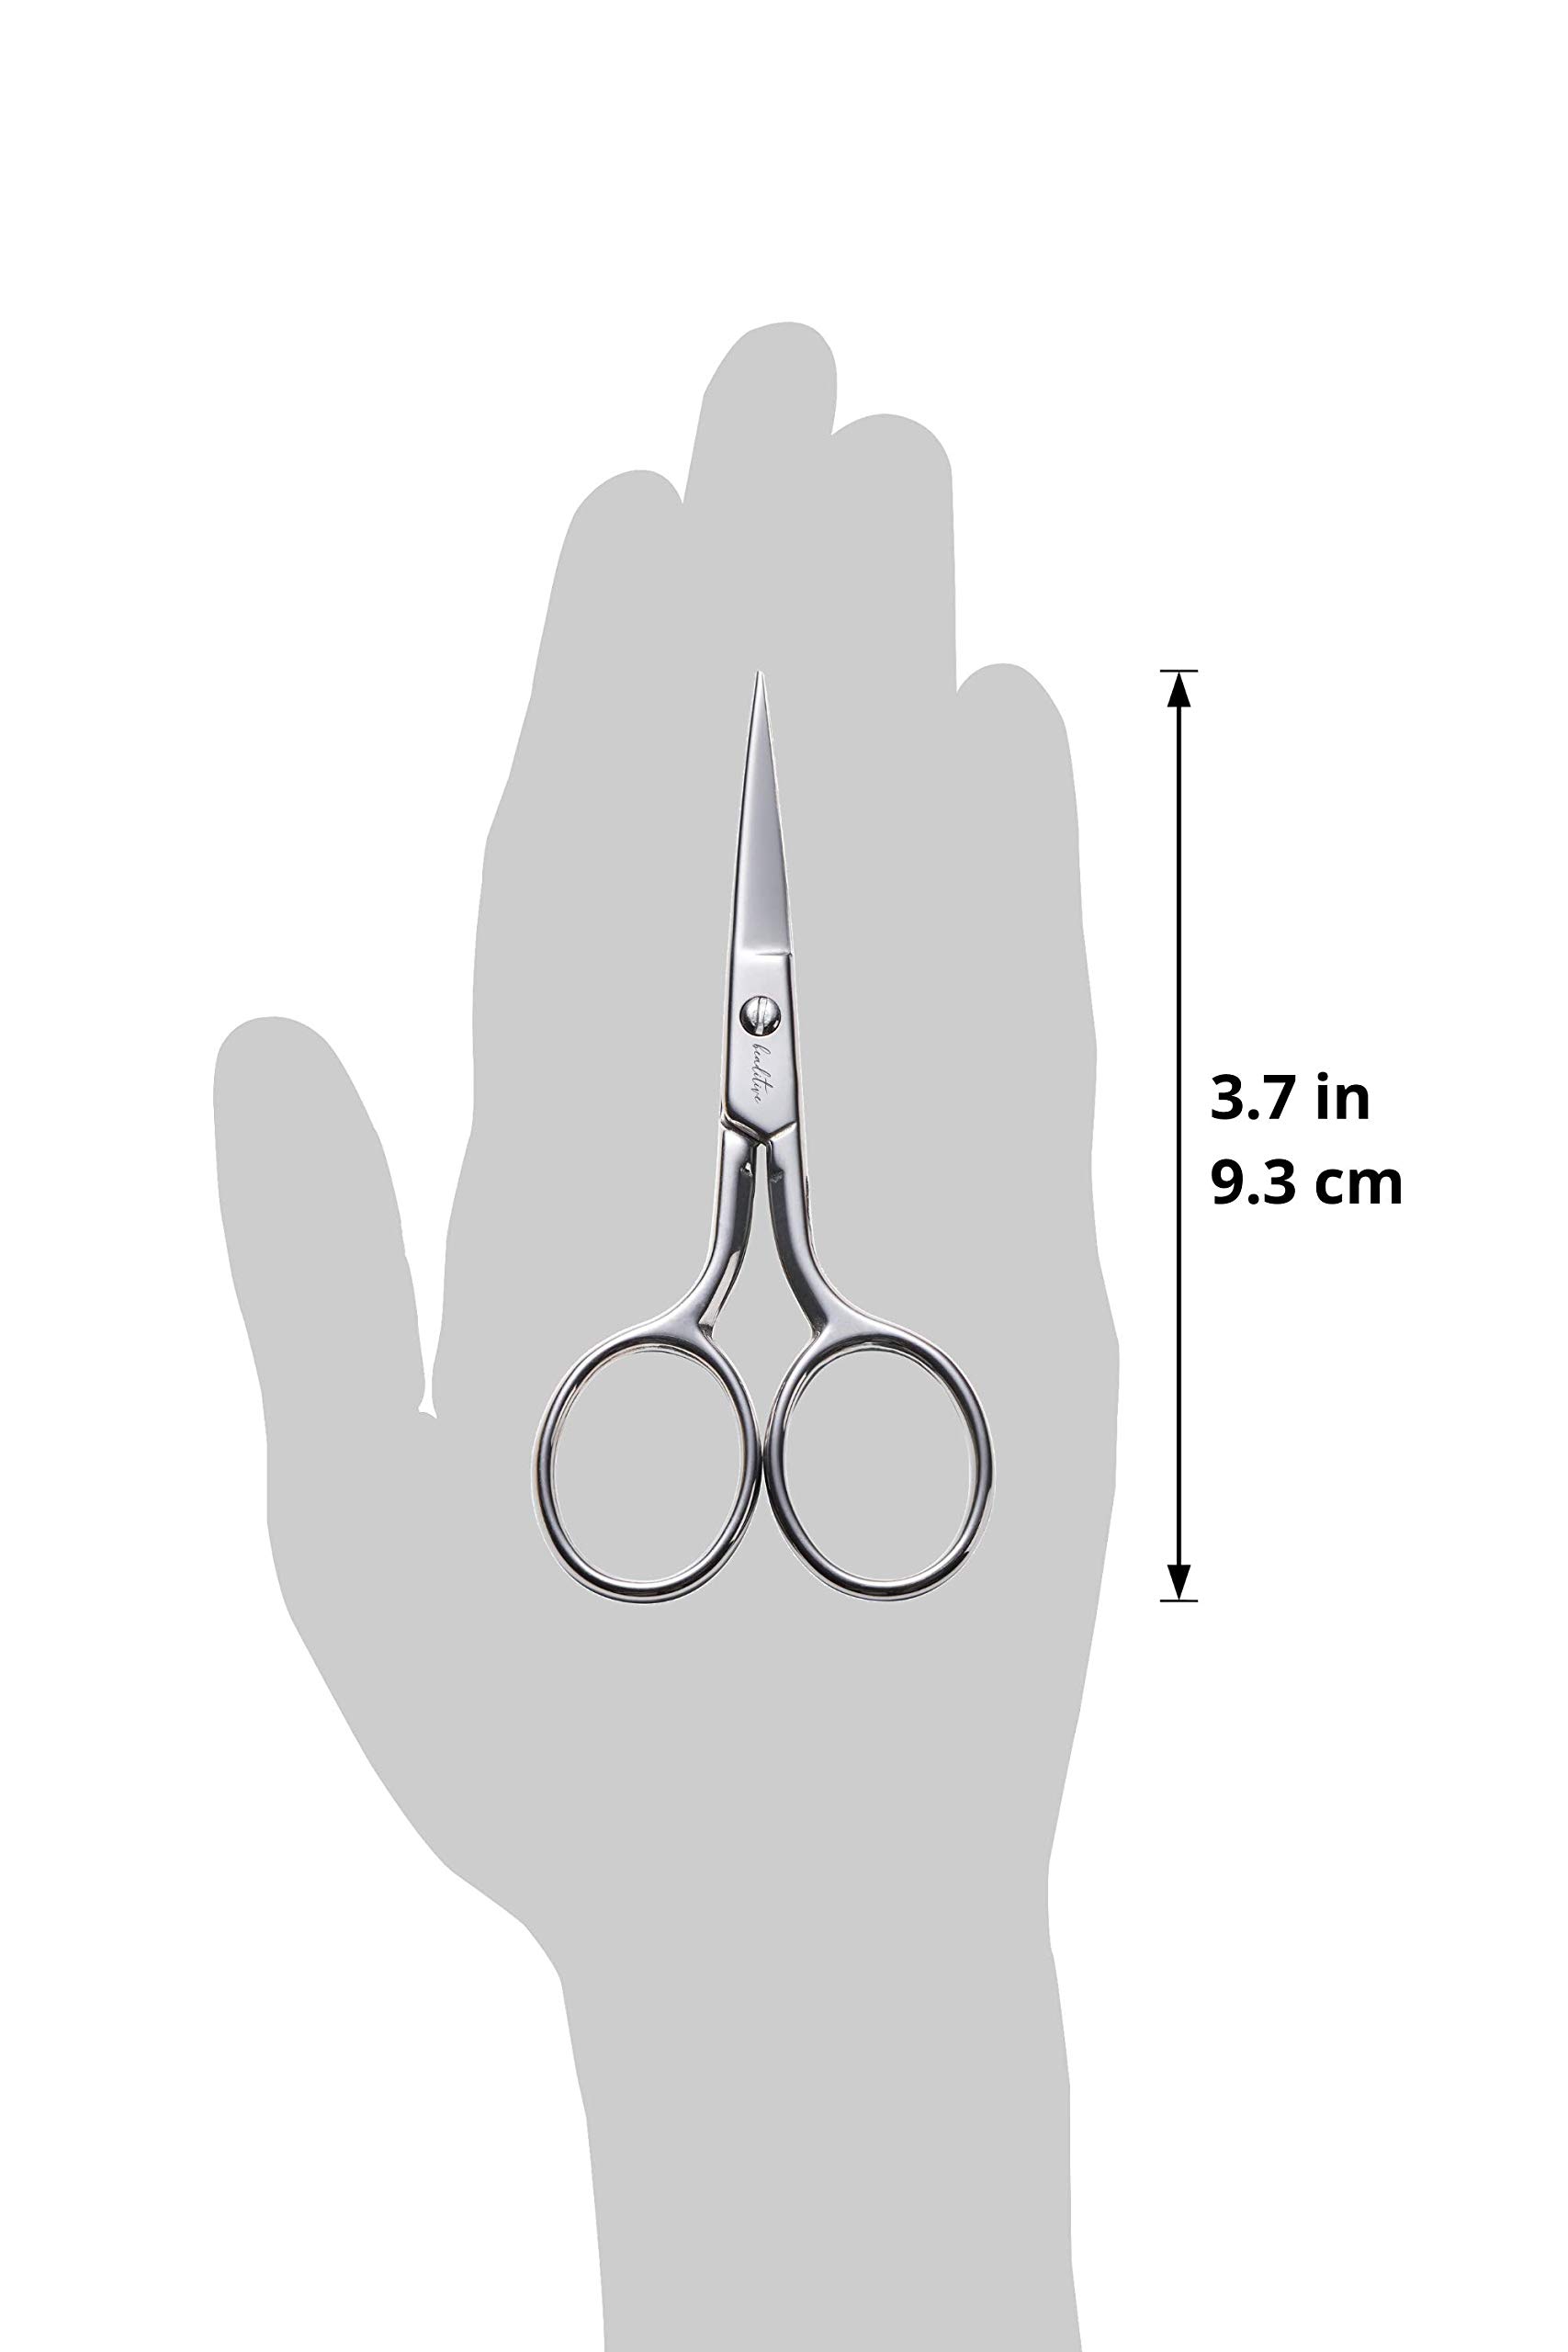 Beaditive Classic Embroidery Scissors with Leather Sheaths - Sewing, Embroidery, Crafting - Stainless Steel Pink